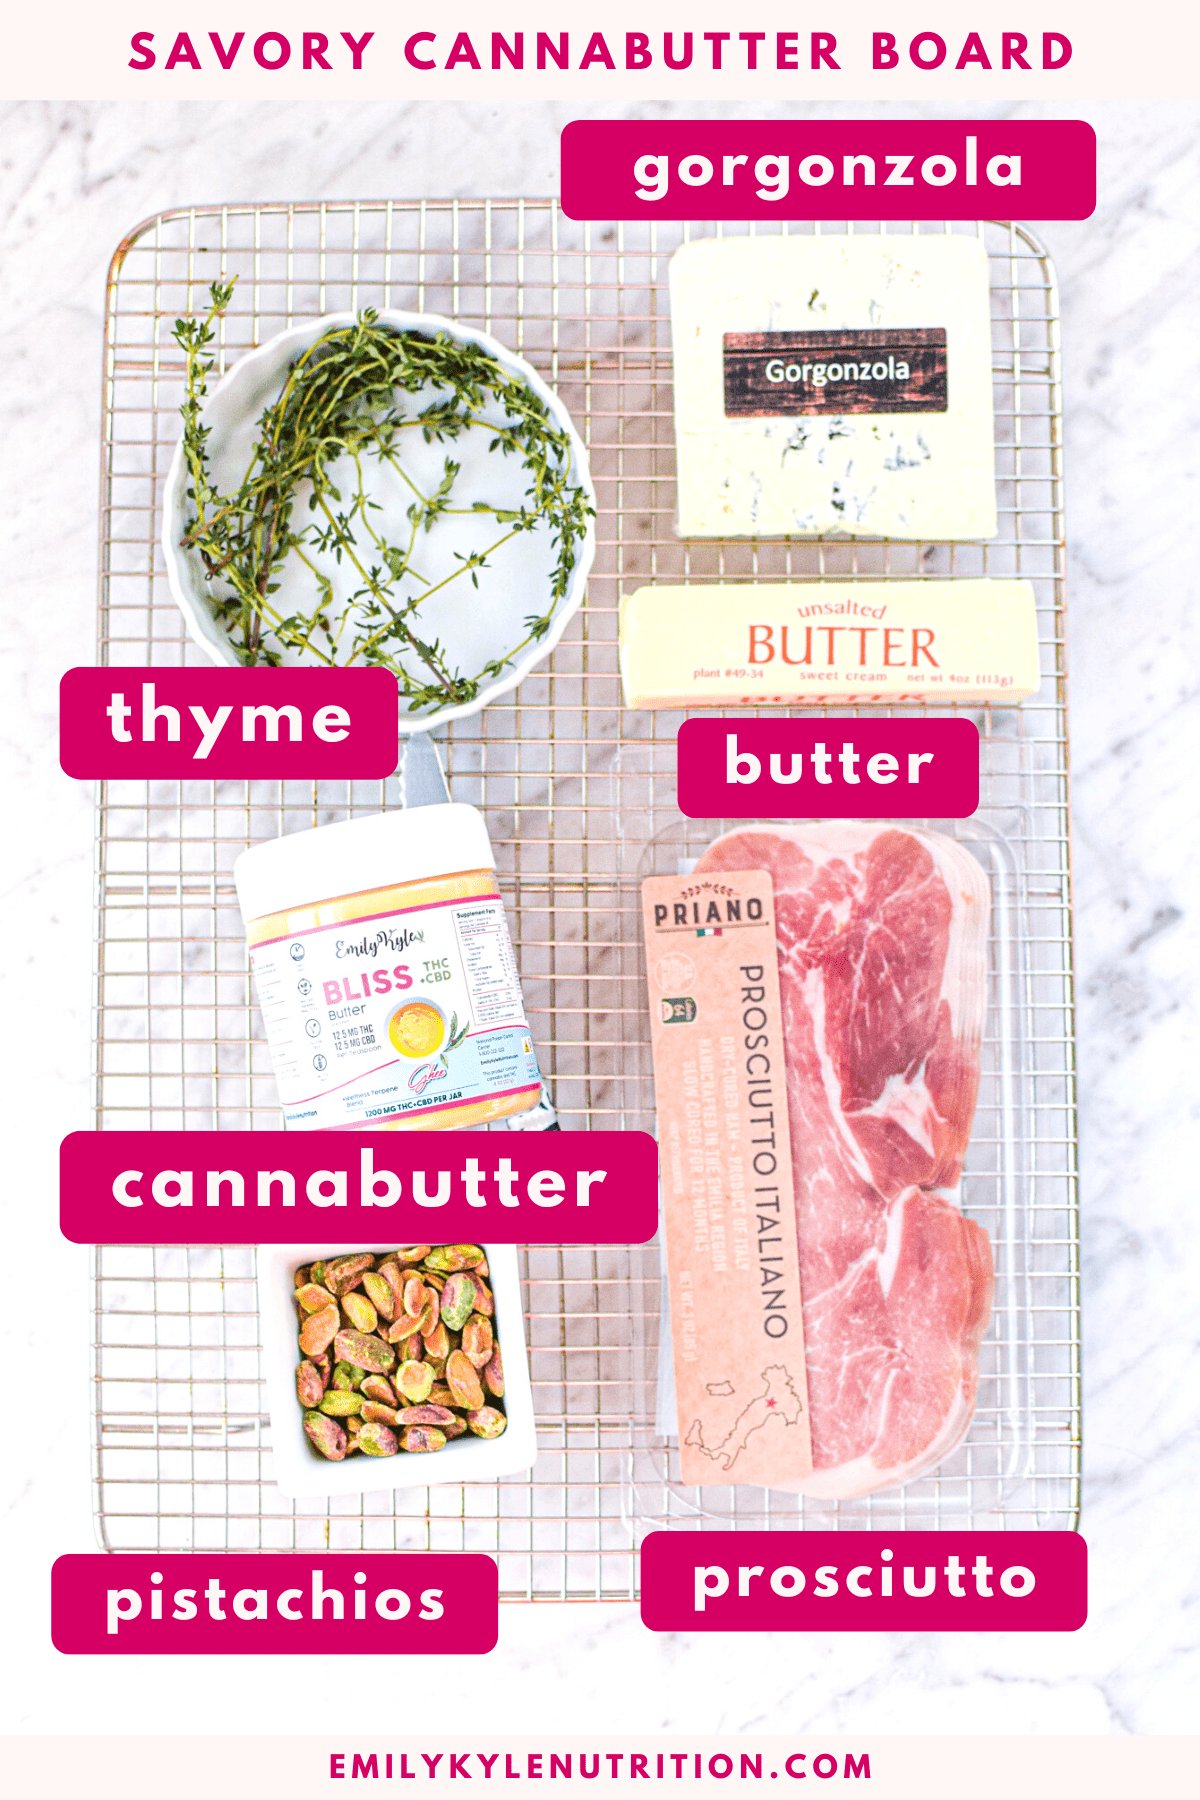 A picture with all of the ingredients needed to make a savory cannabutter board including gorgonzola, thyme, butter, cannabutter, pistachios, and prosciutto.